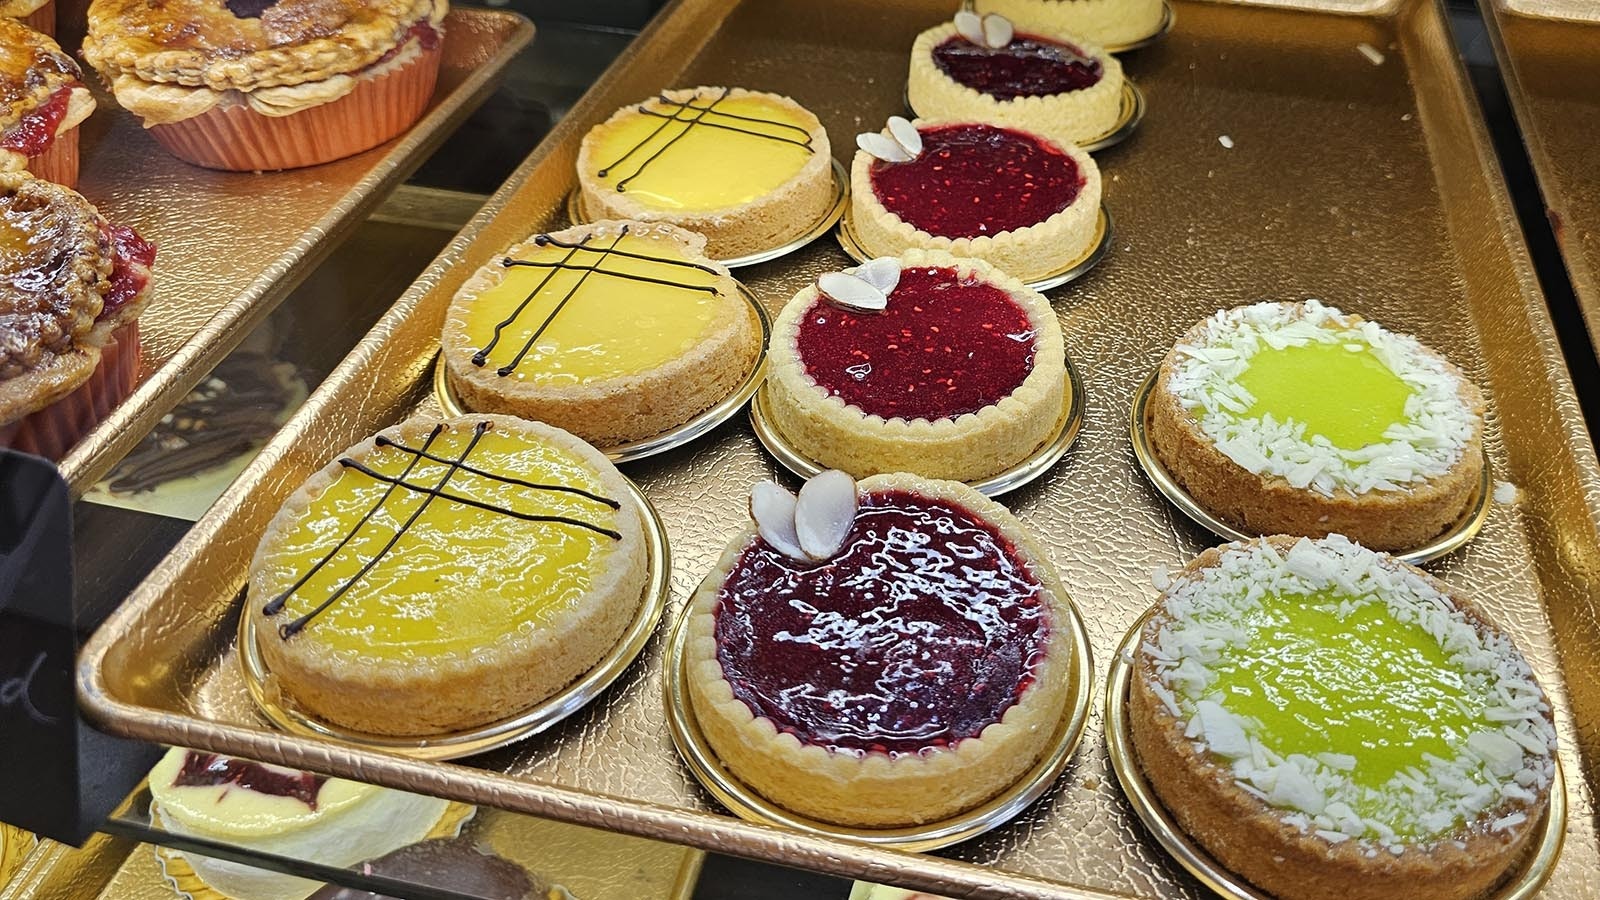 Various tarts are among the selections available at the Torrington bakery, The Bread Doctor.